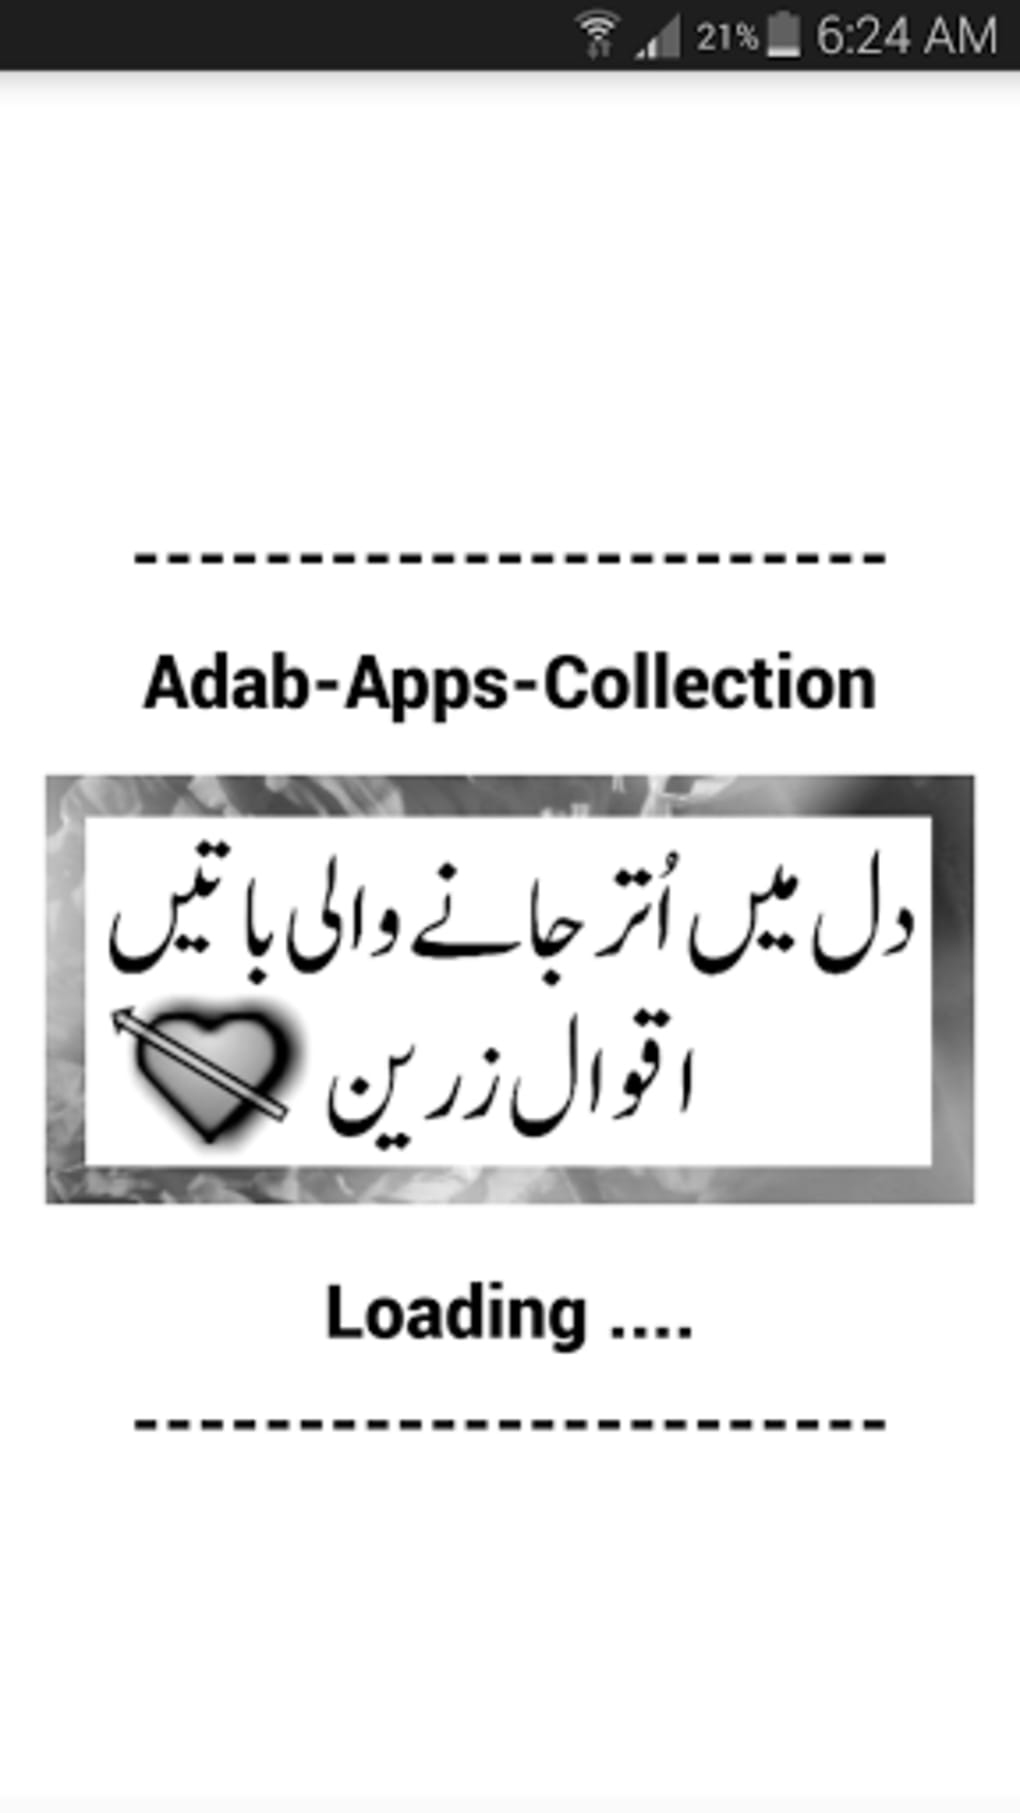 Urdu Best Aqwal e Zareen for Android - Download